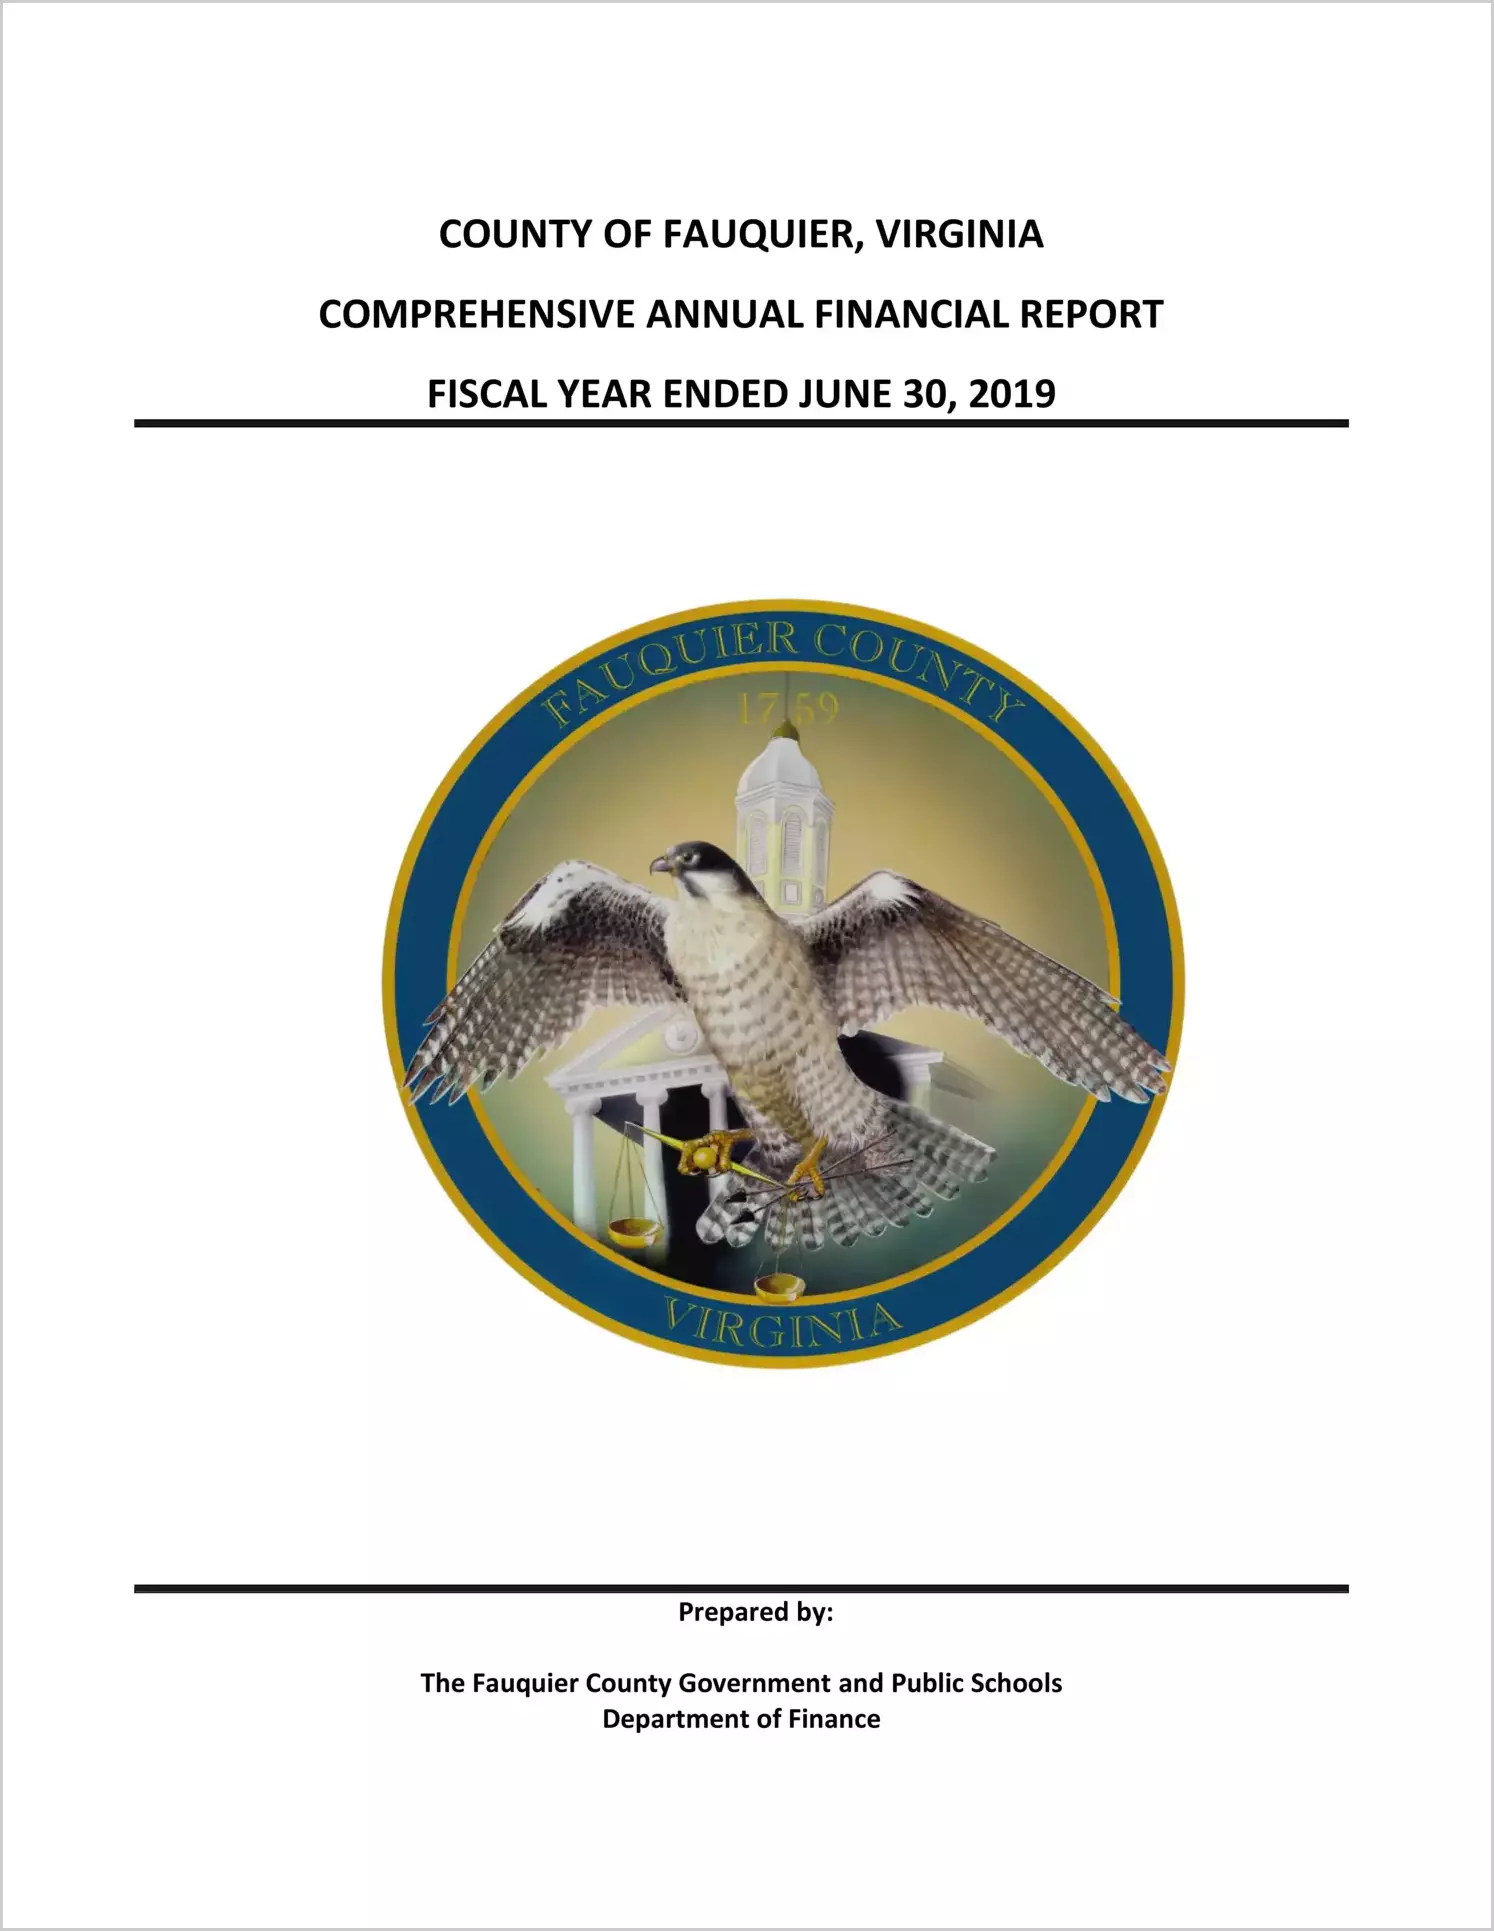 2019 Annual Financial Report for County of Fauquier